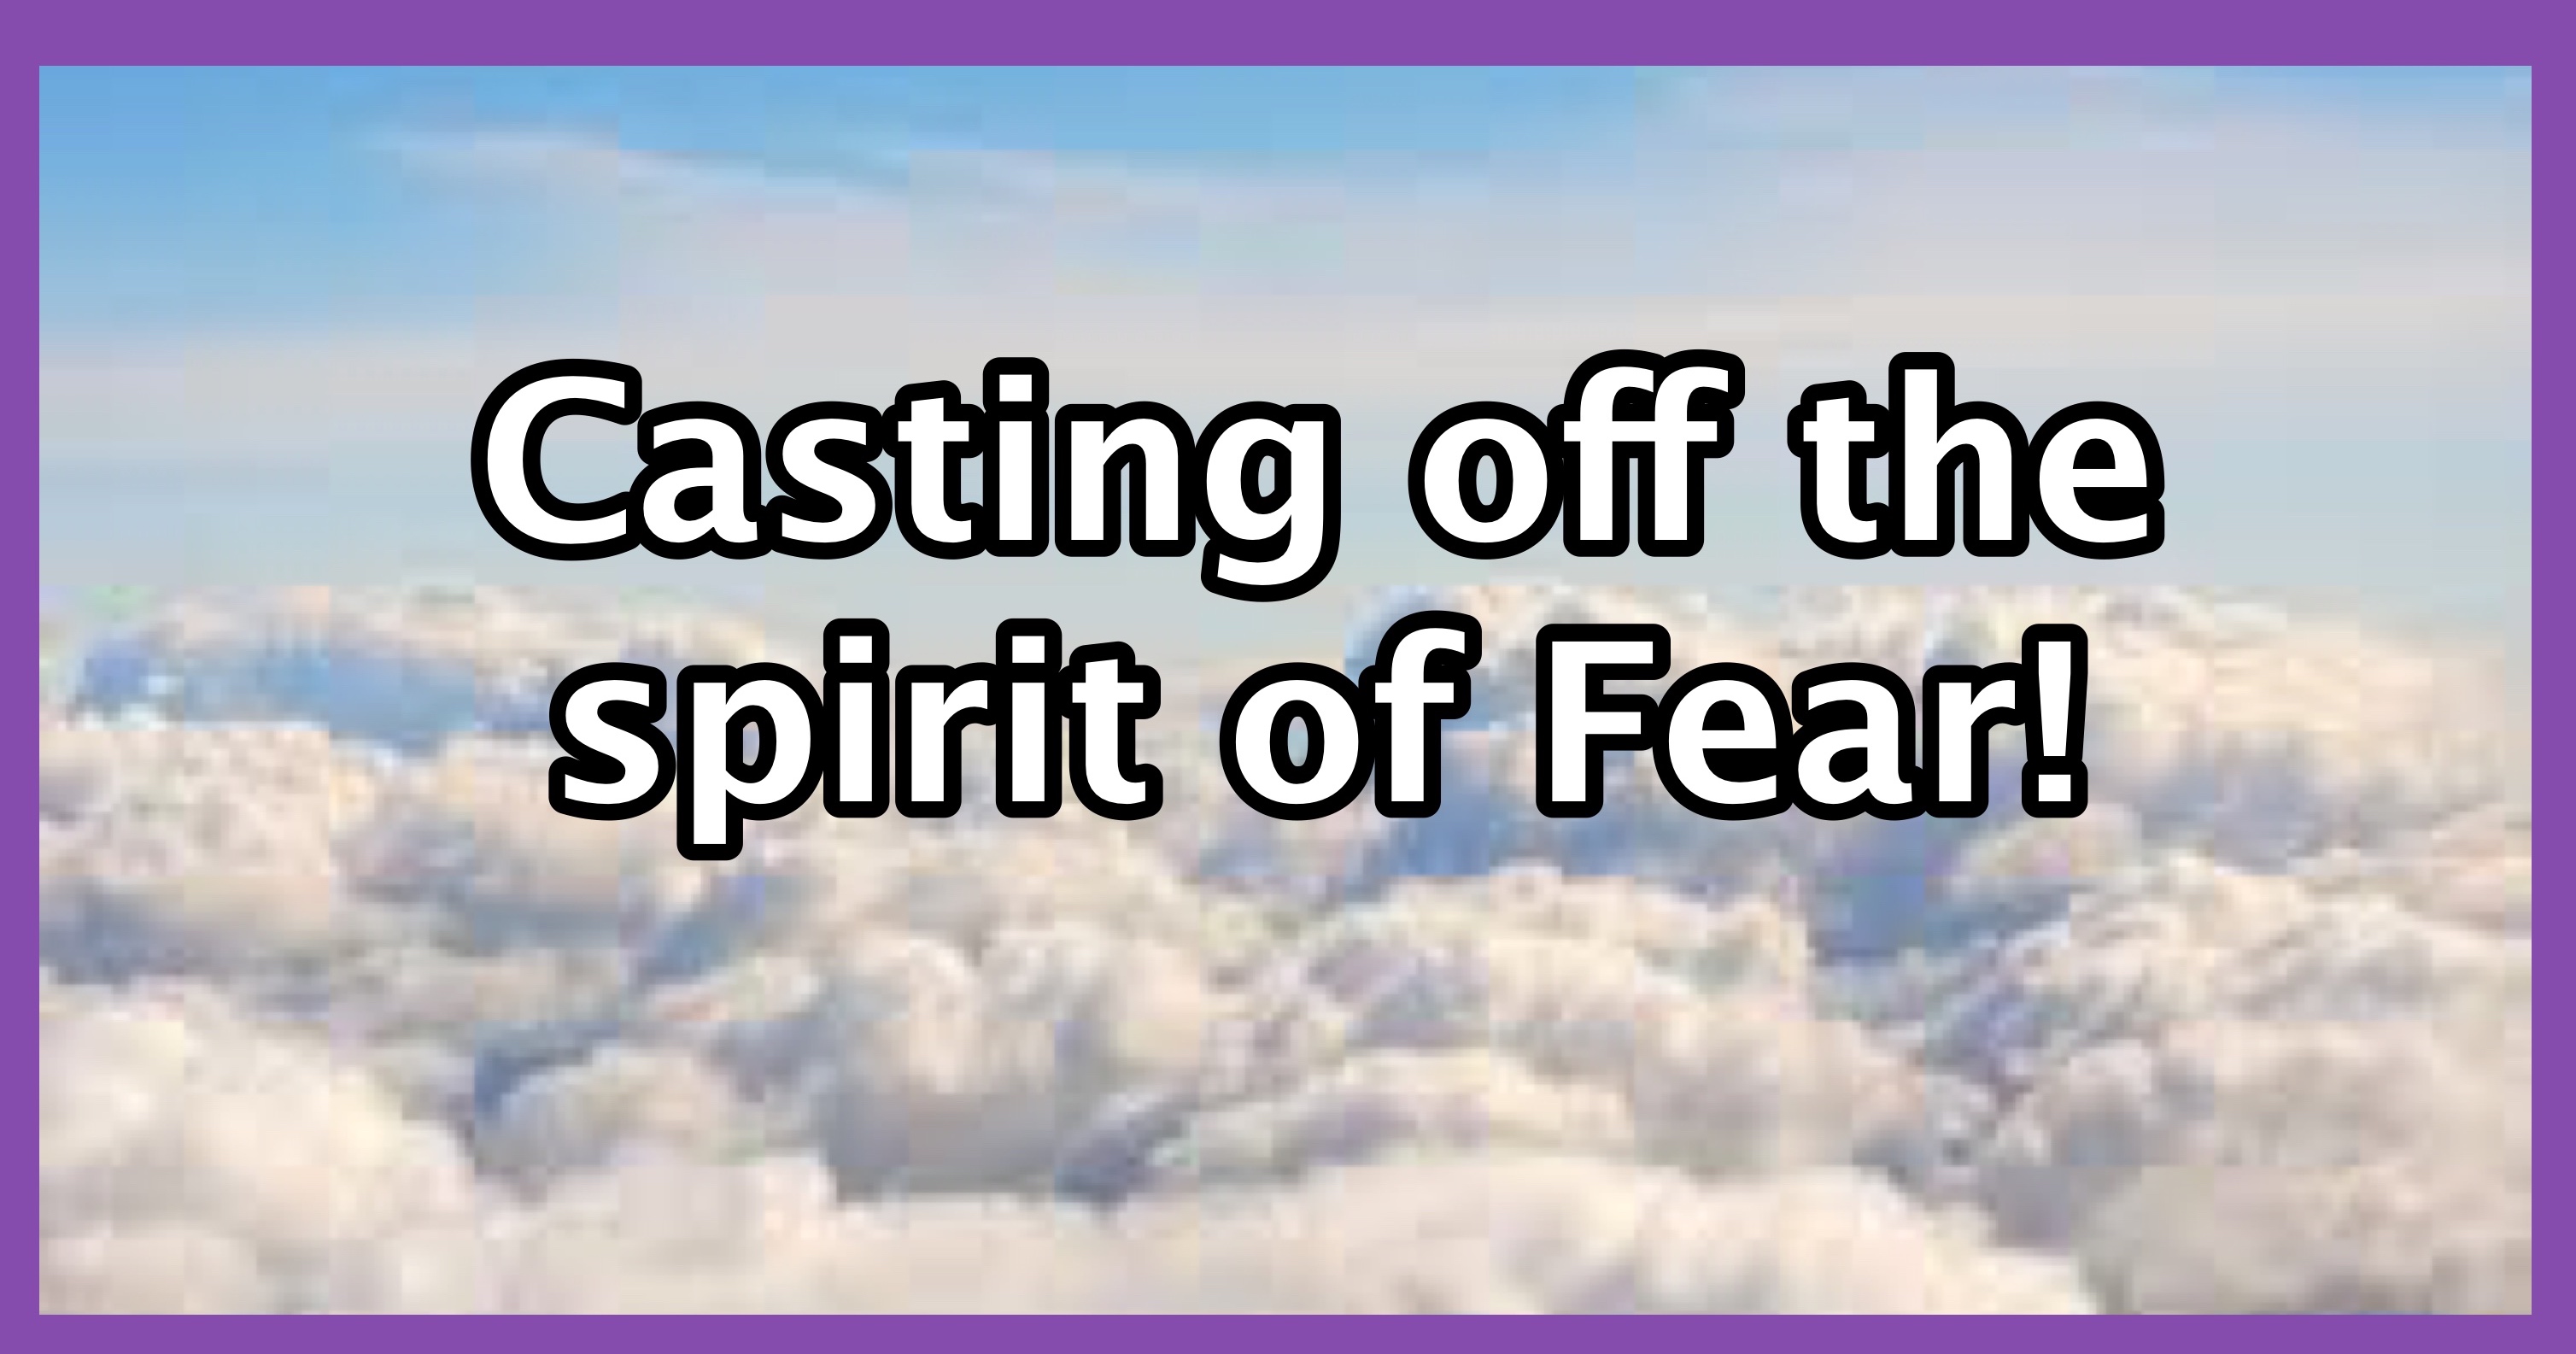 Casting off the spirit of Fear